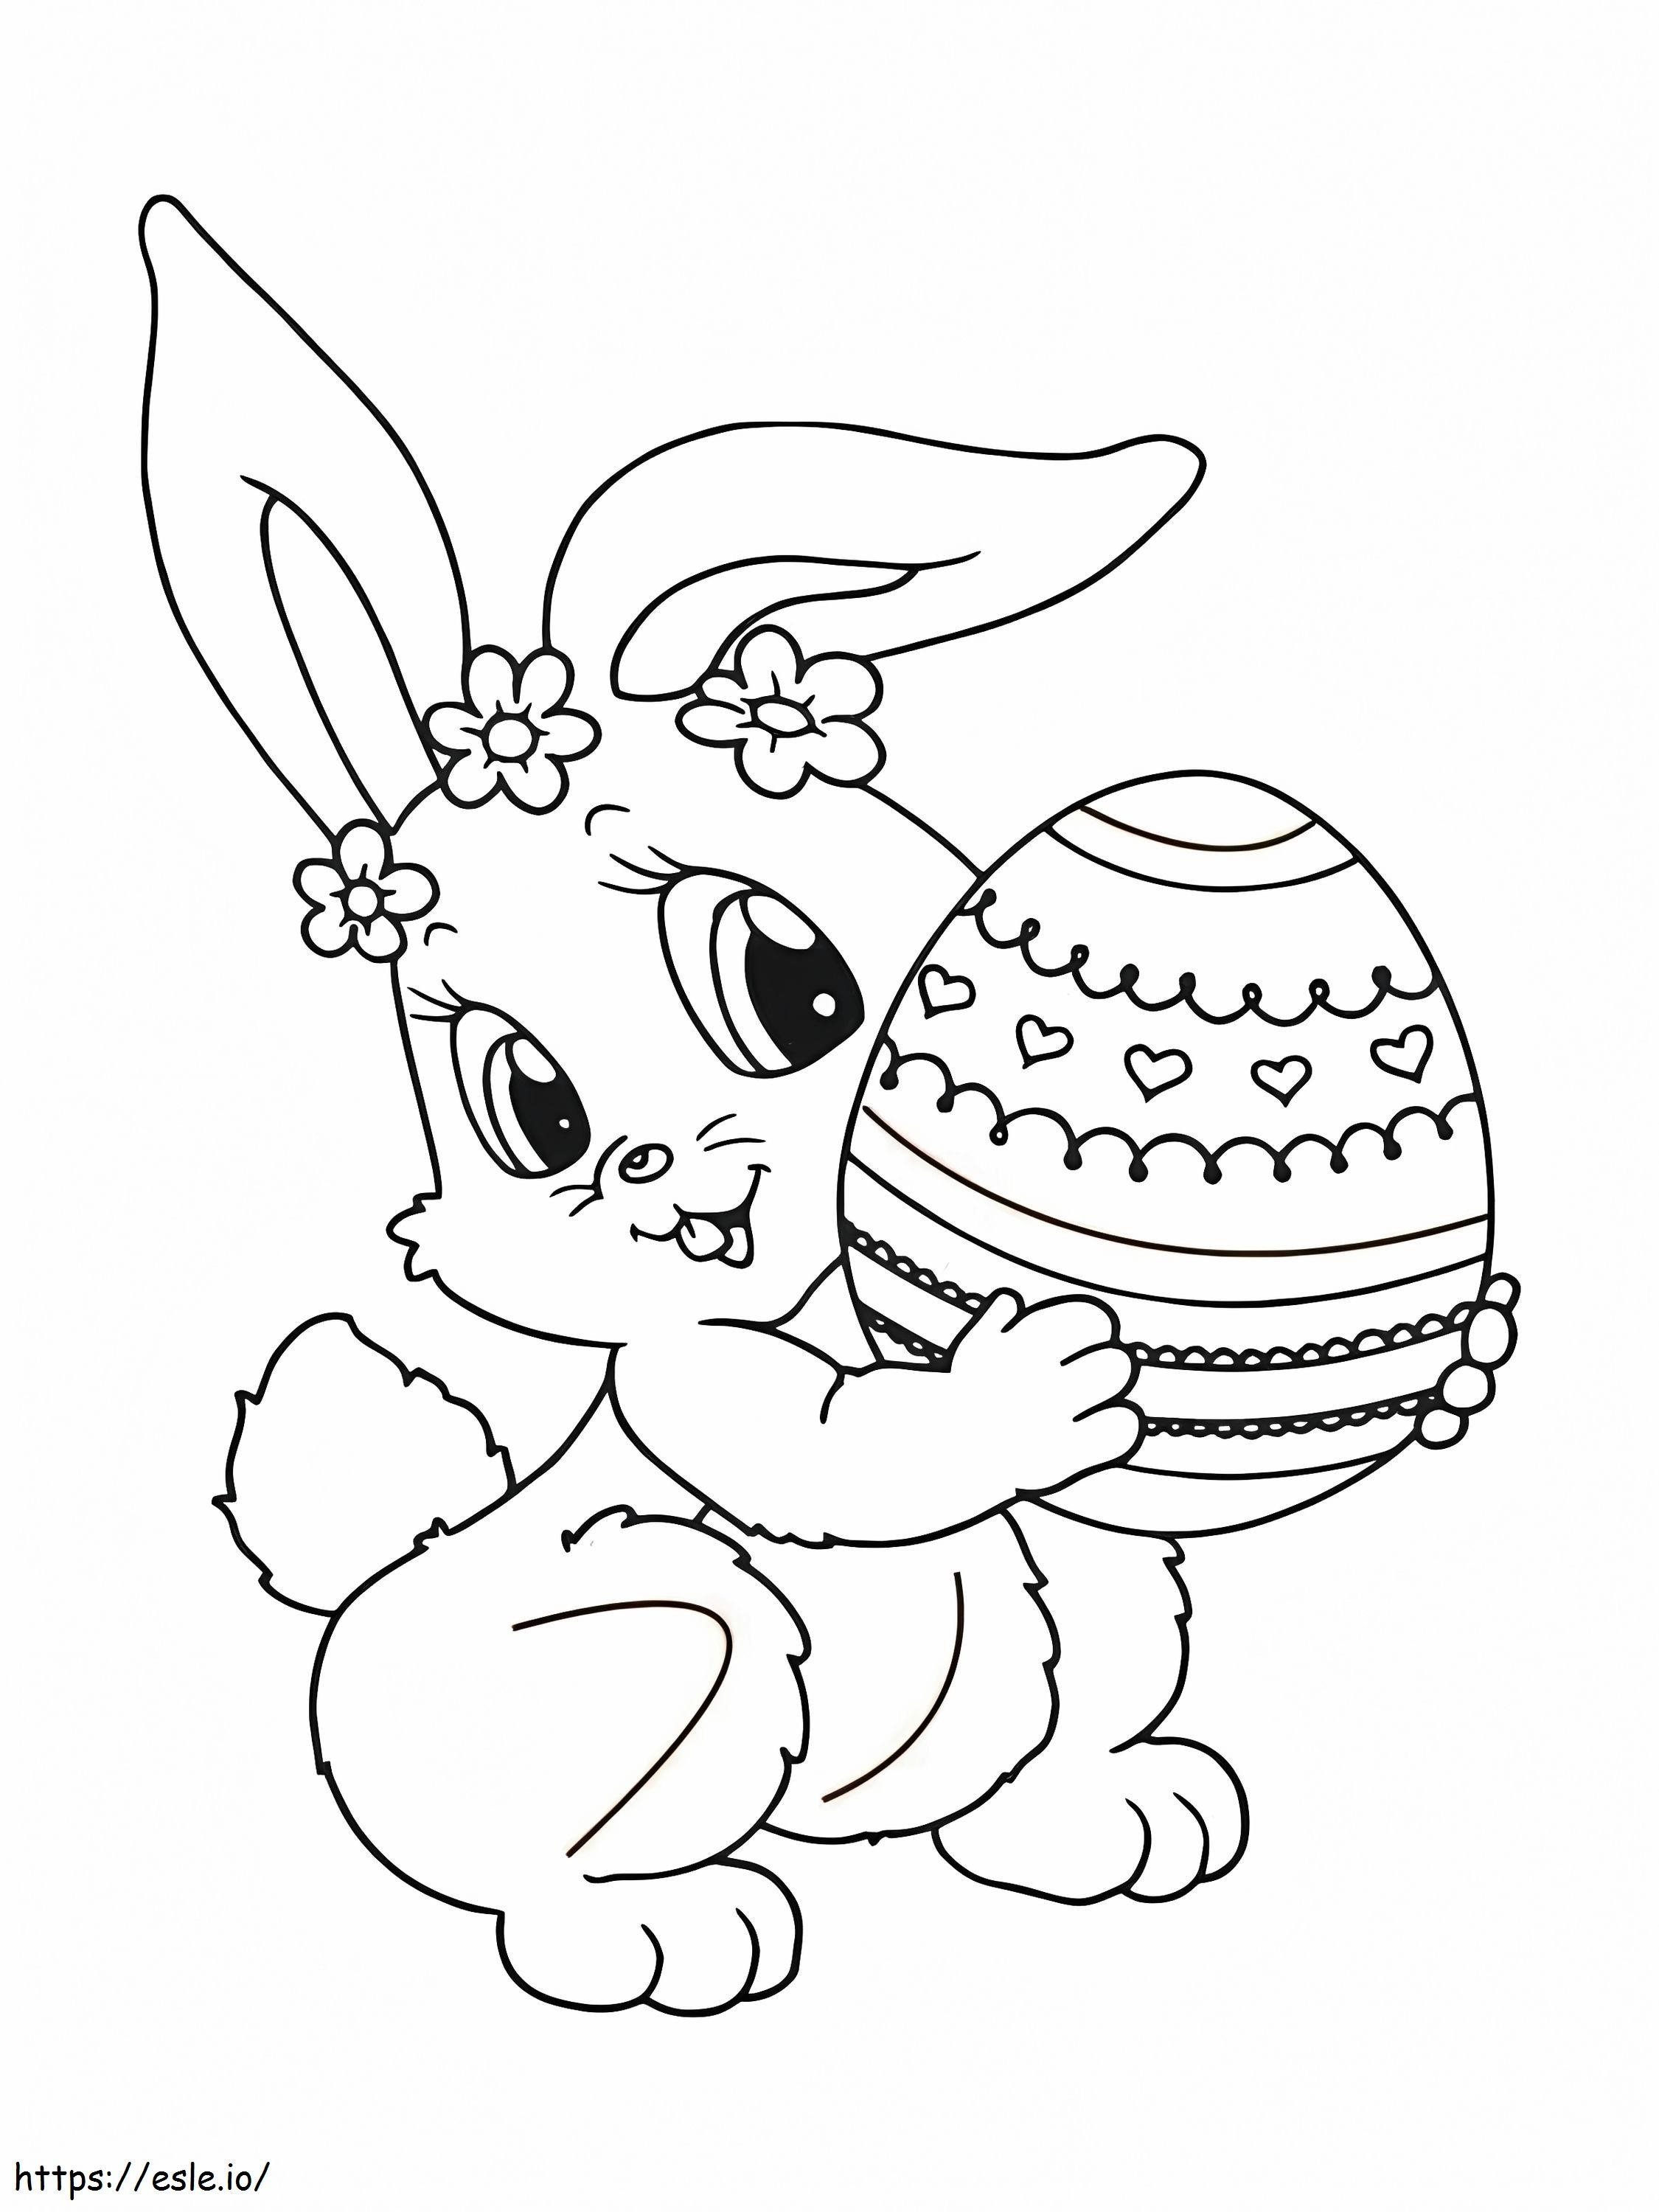 Cute Easter Bunny And Egg 2 coloring page